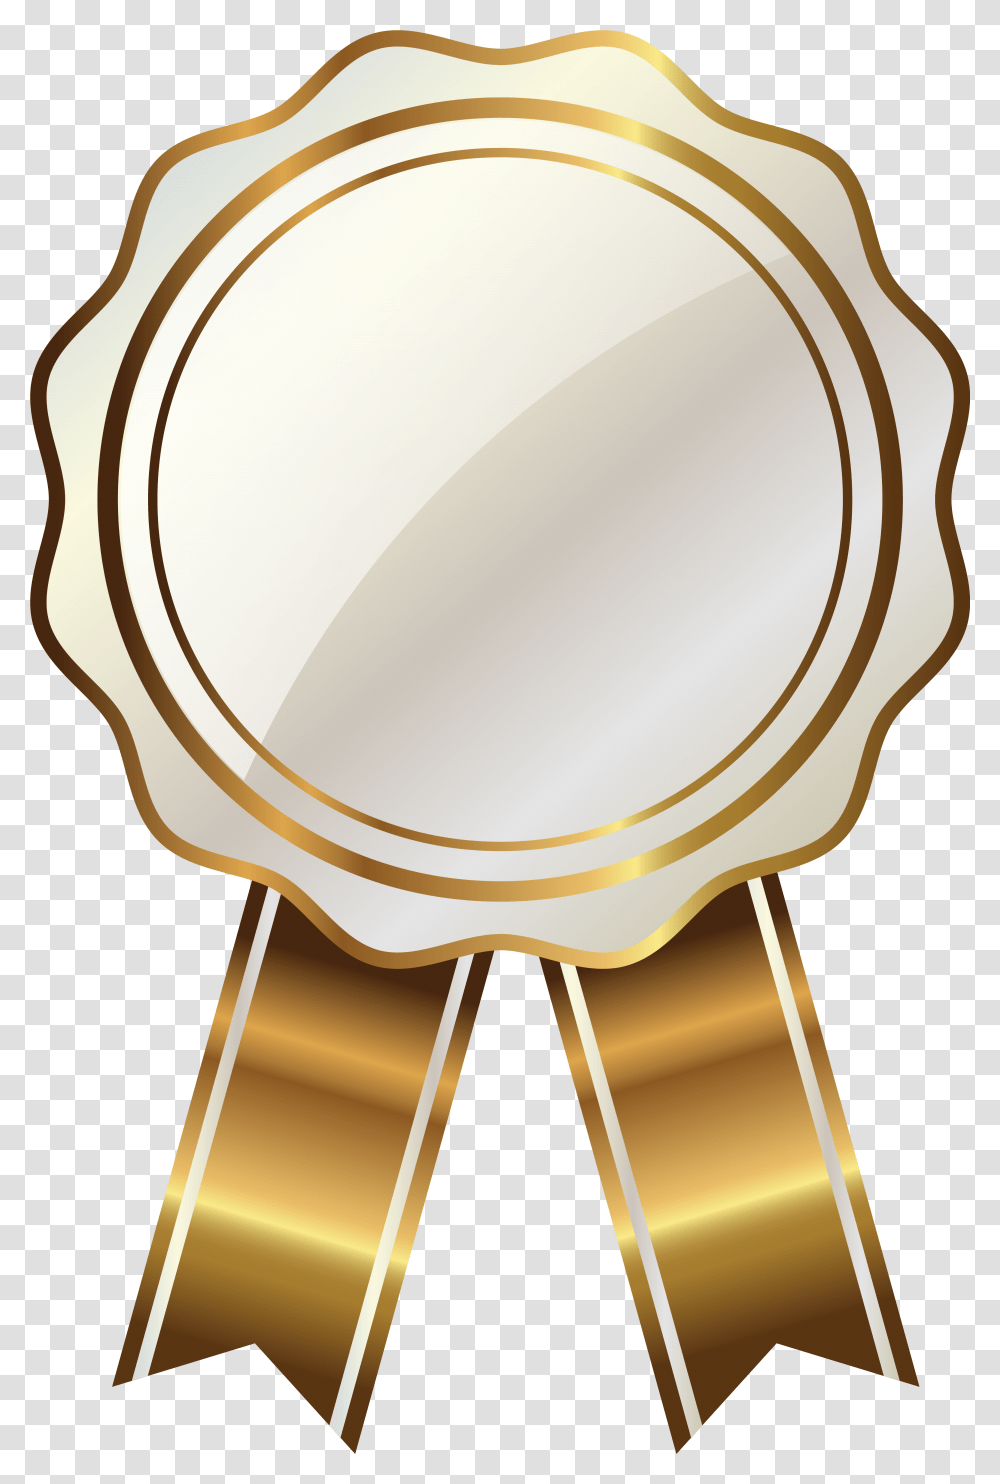 White Seal With Gold Ribbon Clipart Image Gold Ribbon Clip Art, Lamp, Mirror Transparent Png